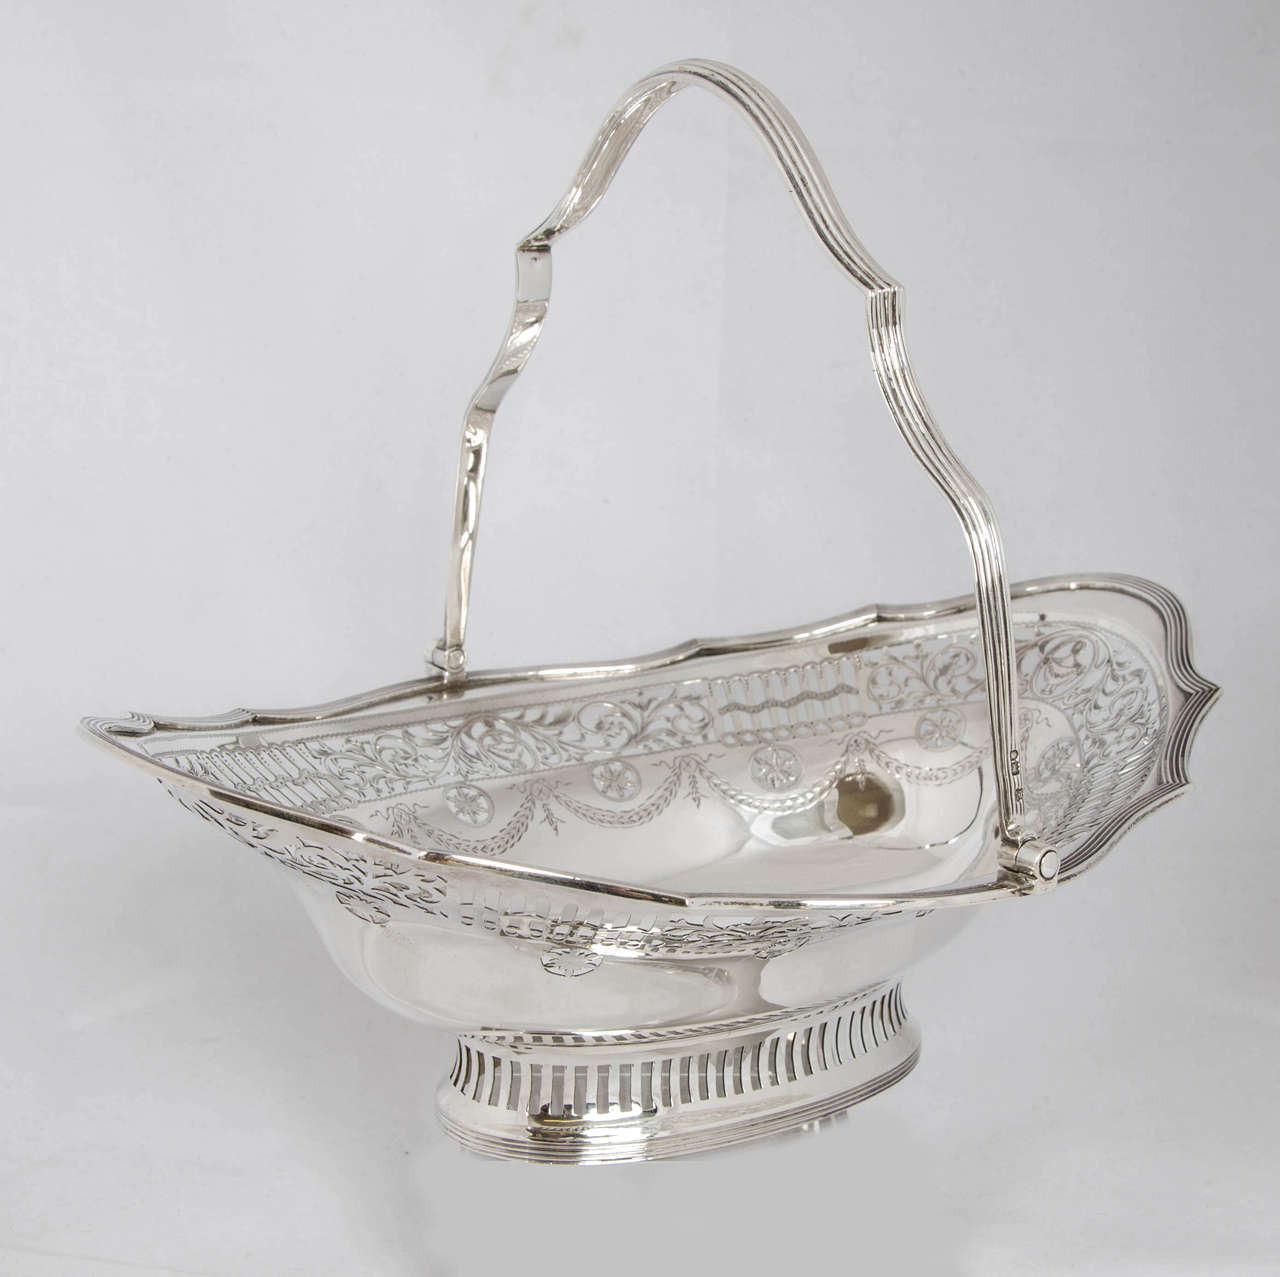 An Edwardian silver cake basket of classical Adams design. The basket was made in London in 1906 by Charles Stuart Harris, and retailed by The Bond Street firm of Thomas. It is 13